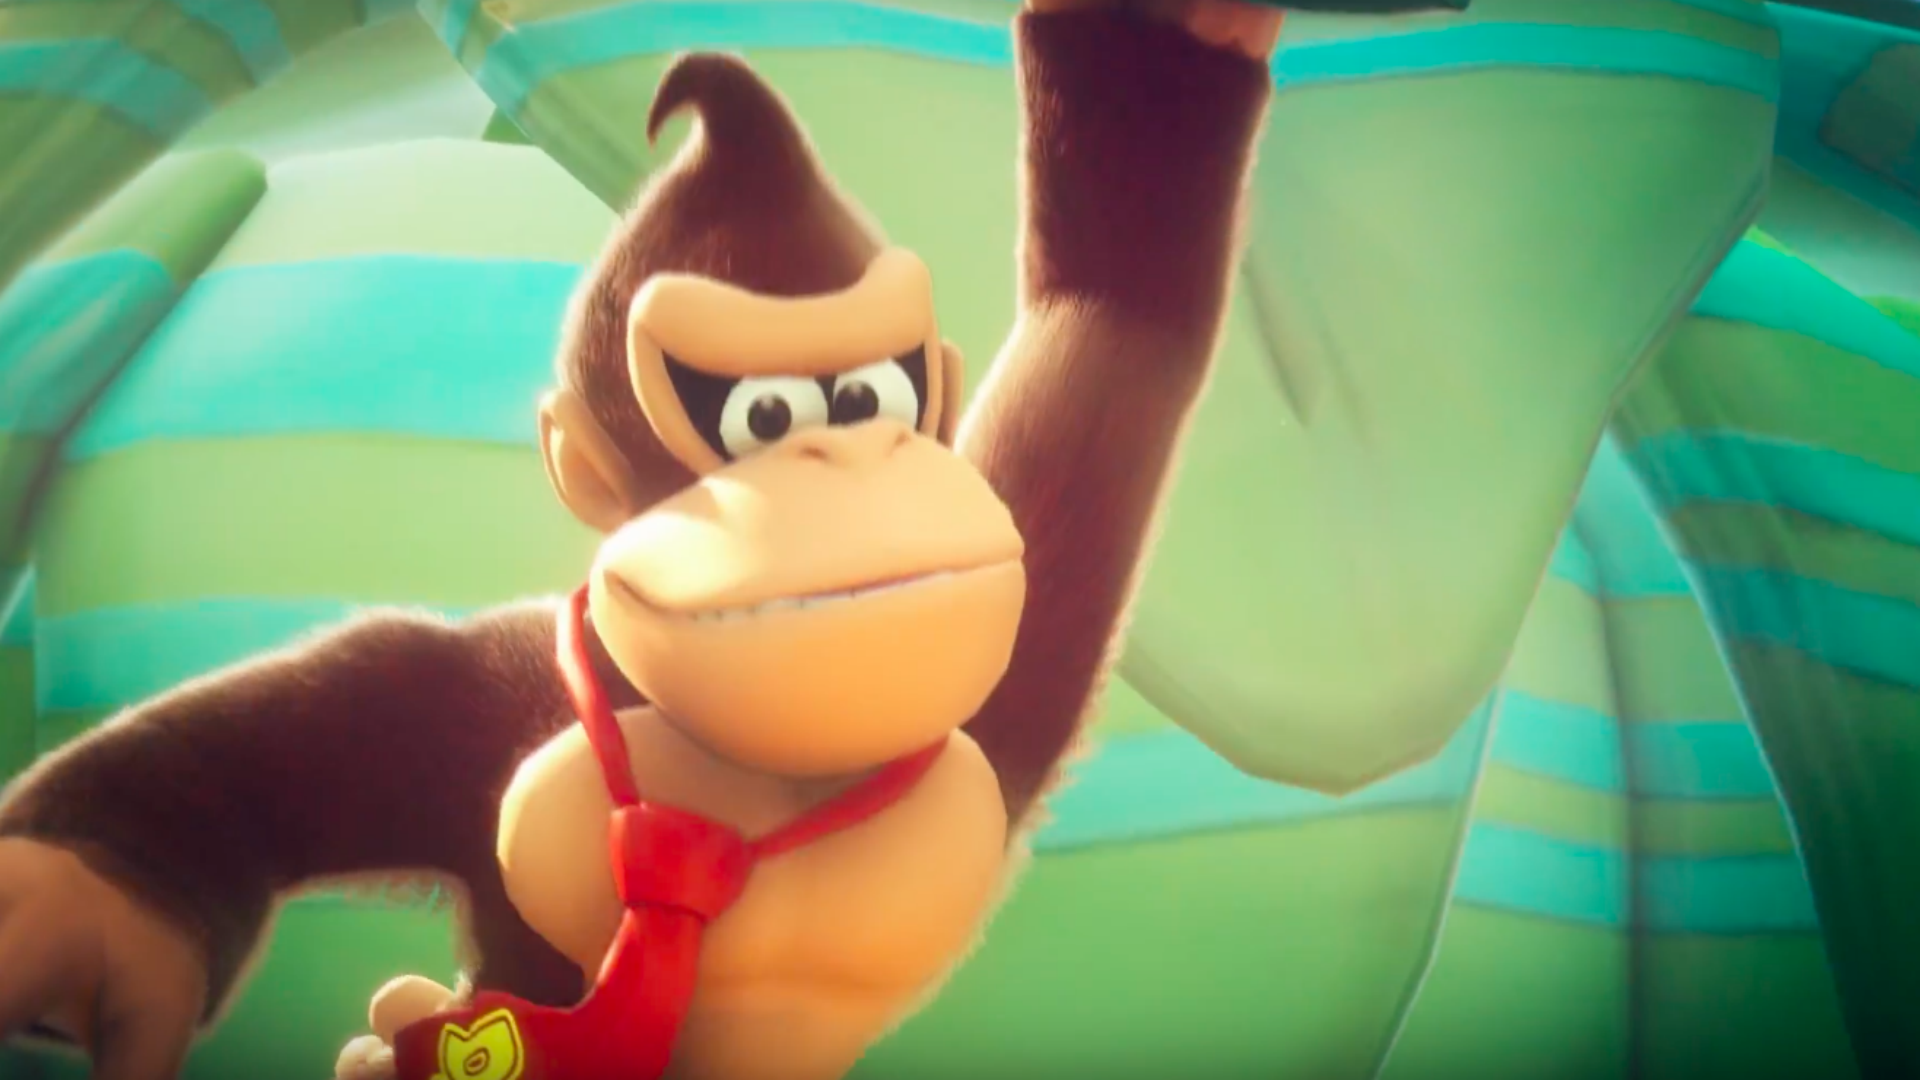 Donkey Kong Swings Into Battle in Mario + Rabbids Kingdom Battle this Spring